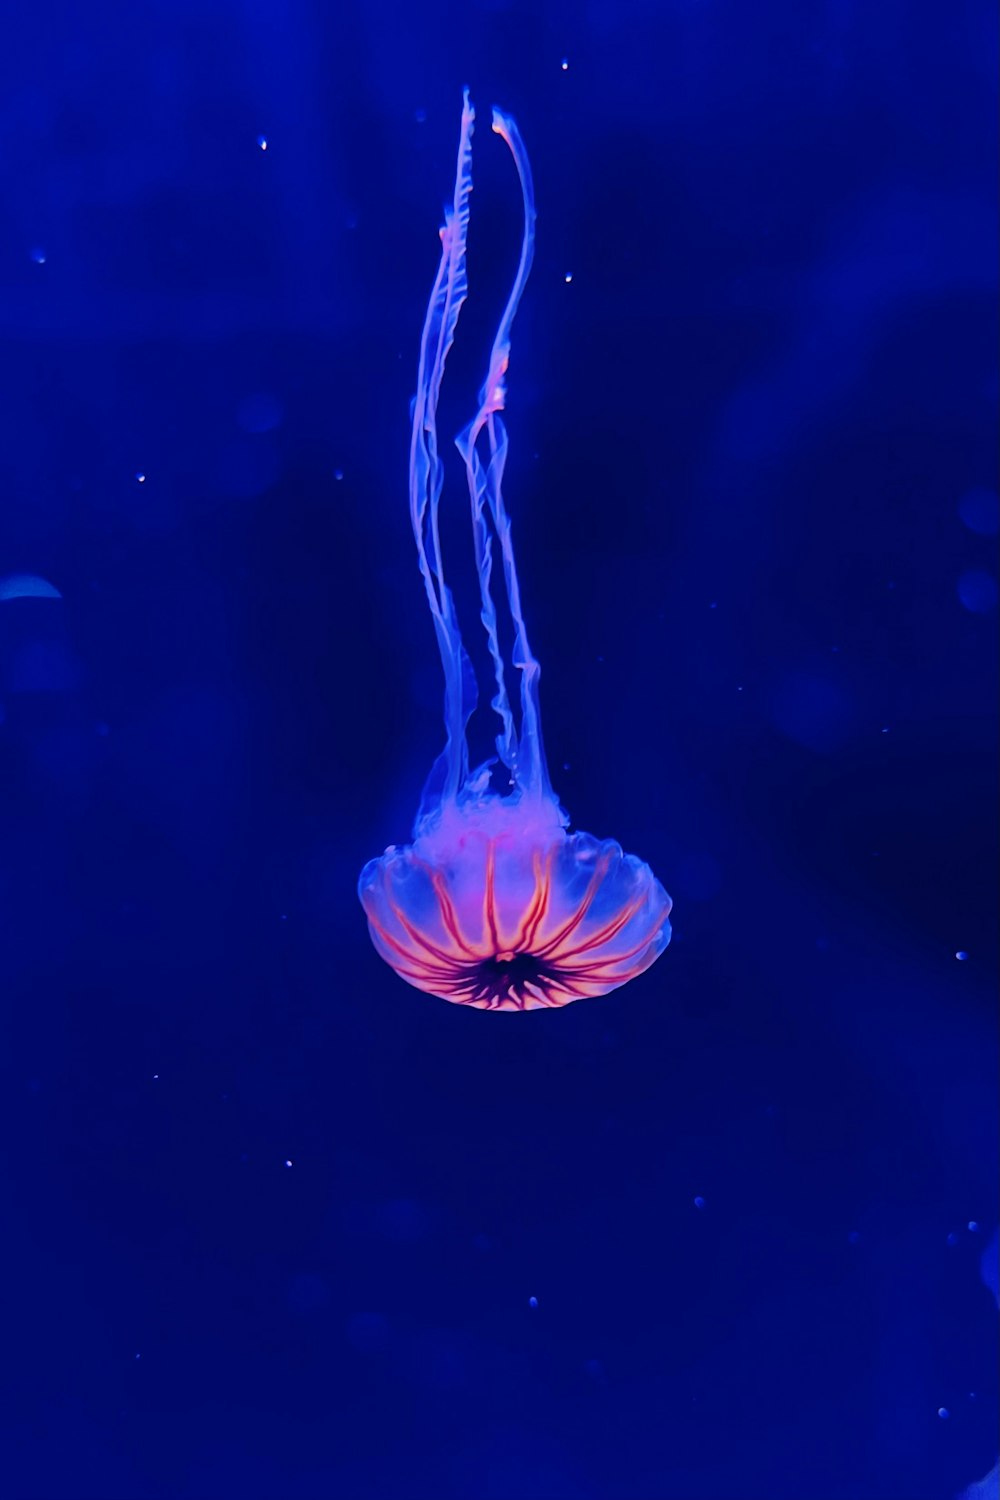 blue and white jelly fish